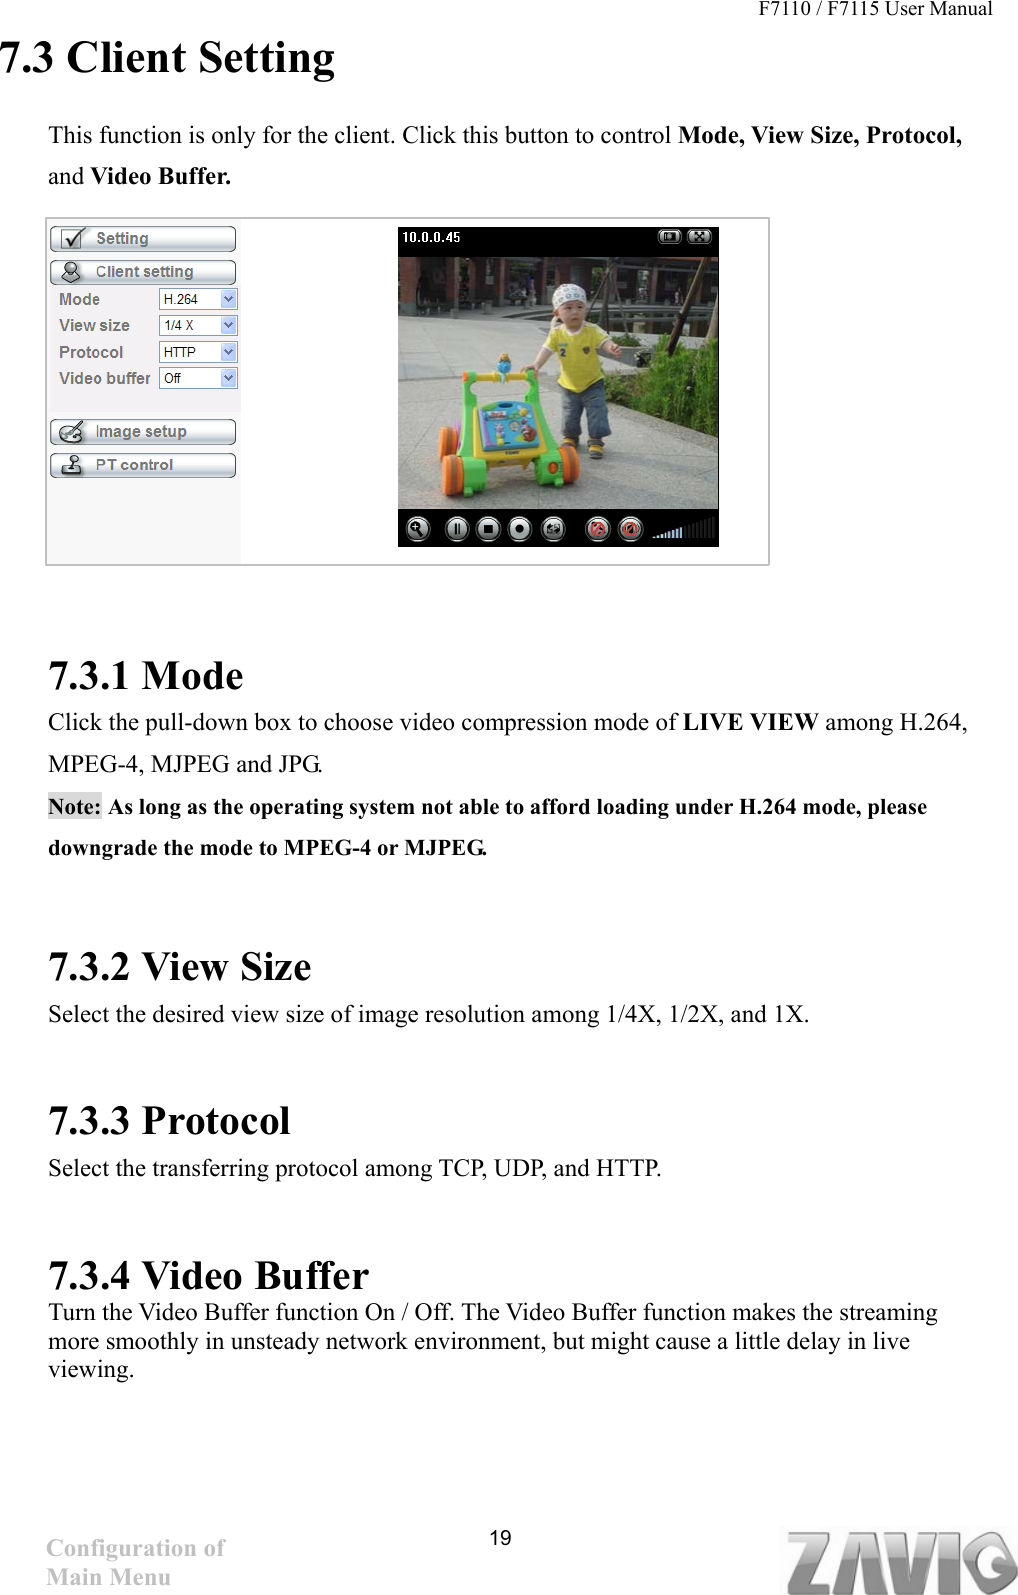 F7110 / F7115 User Manual   7.3 Client Setting This function is only for the client. Click this button to control Mode, View Size, Protocol, and Video Buffer.          7.3.1 Mode Click the pull-down box to choose video compression mode of LIVE VIEW among H.264, MPEG-4, MJPEG and JPG.   Note: As long as the operating system not able to afford loading under H.264 mode, please downgrade the mode to MPEG-4 or MJPEG.       7.3.2 View Size Select the desired view size of image resolution among 1/4X, 1/2X, and 1X.  7.3.3 Protocol Select the transferring protocol among TCP, UDP, and HTTP.      7.3.4 Video Buffer   Turn the Video Buffer function On / Off. The Video Buffer function makes the streaming more smoothly in unsteady network environment, but might cause a little delay in live viewing. 19Configuration of Main Menu 